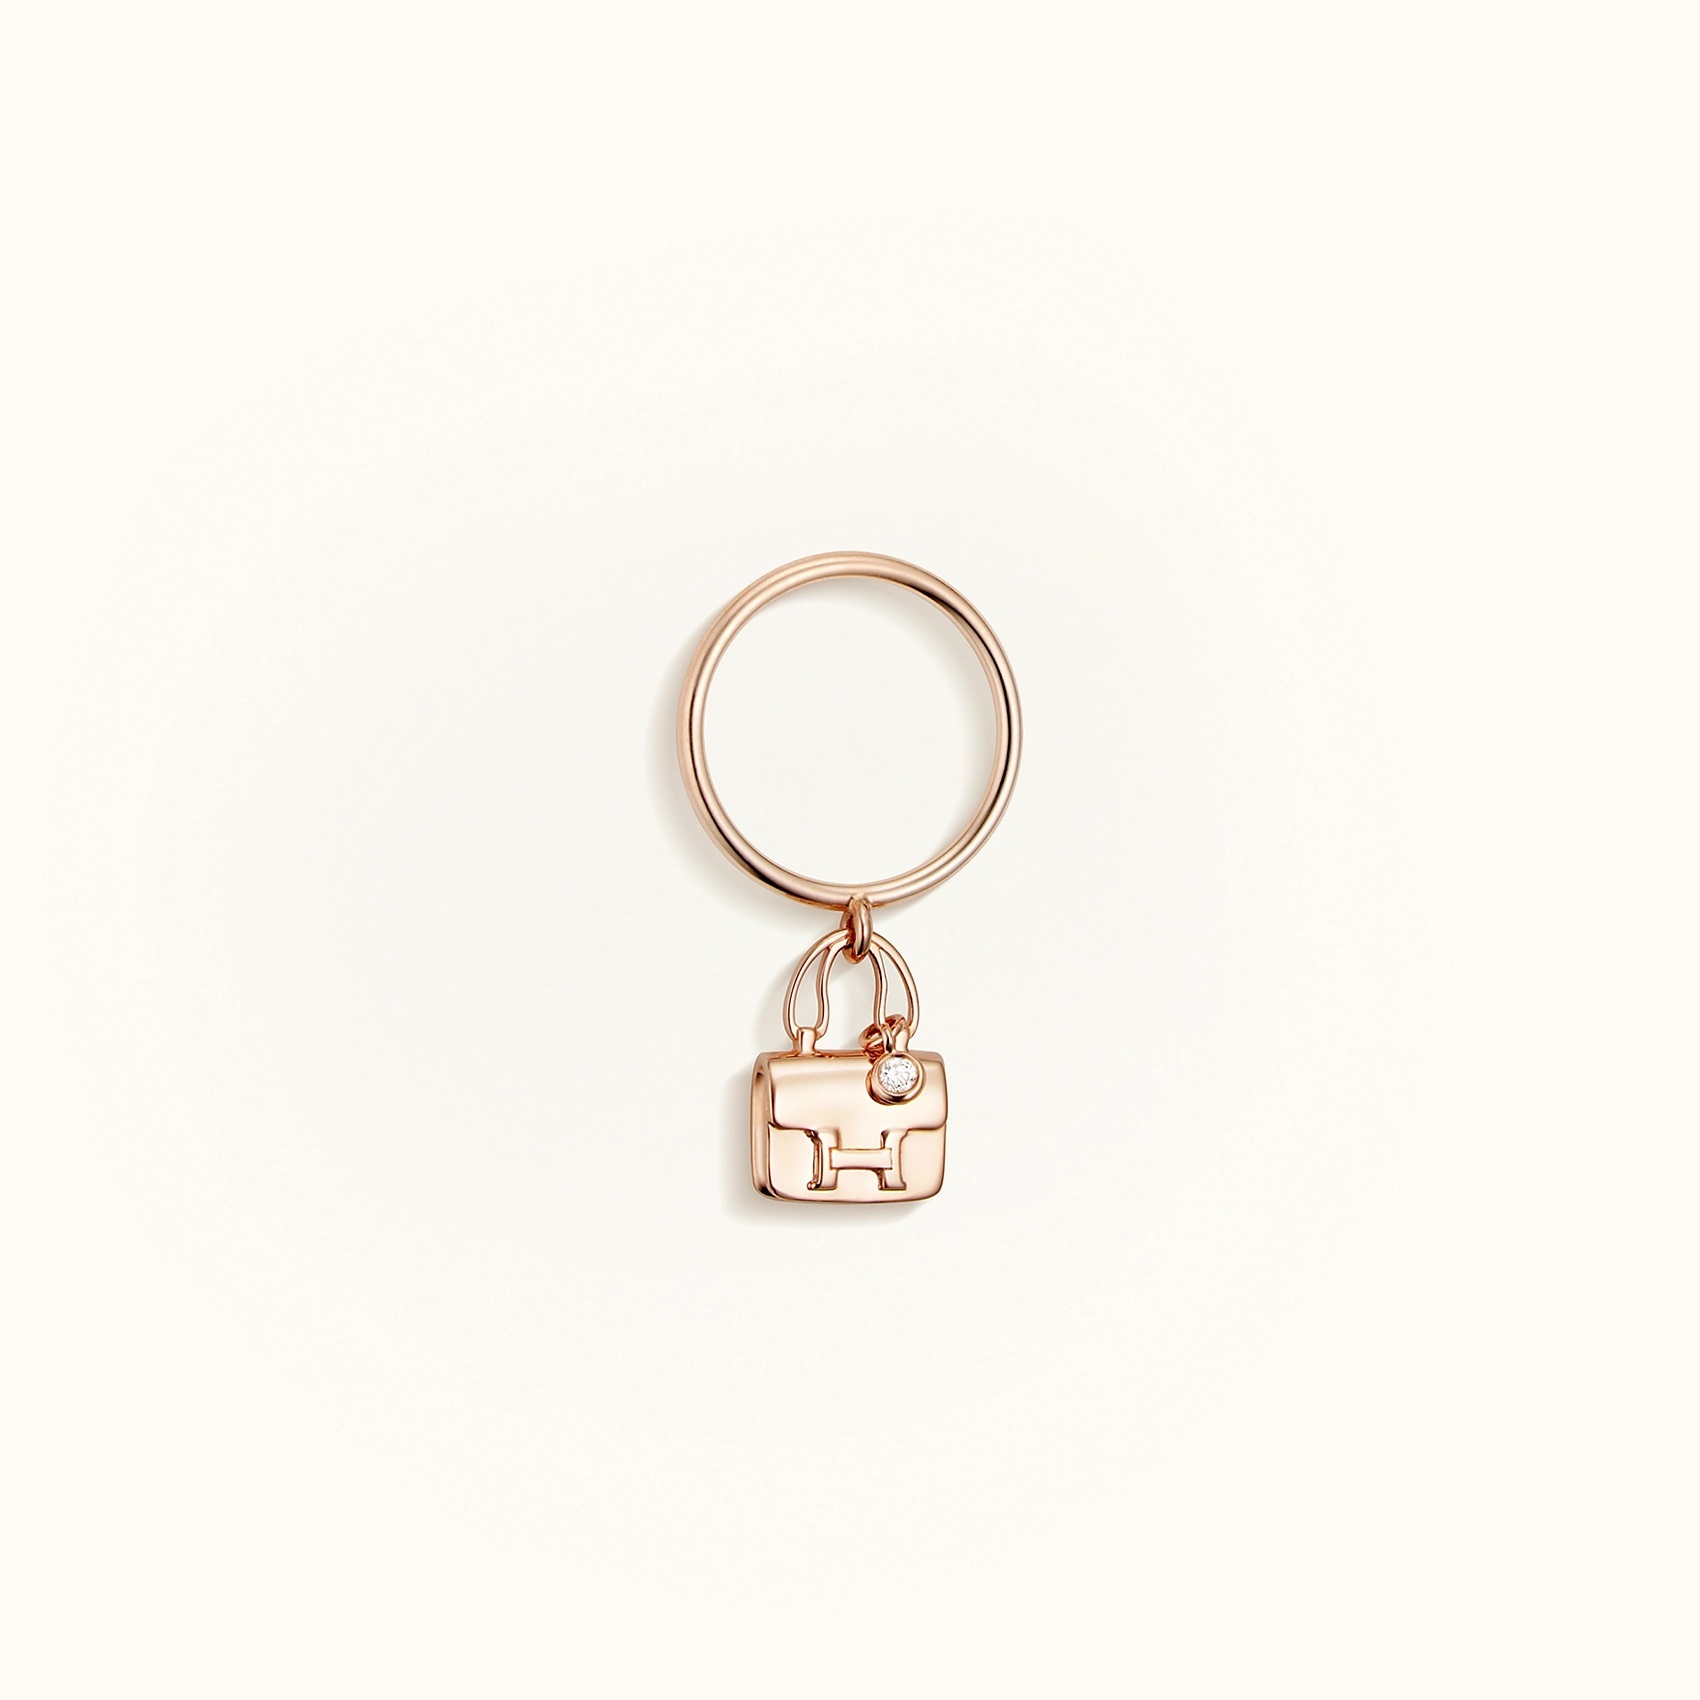 HERMES AMULETTES CONSTANCE RING